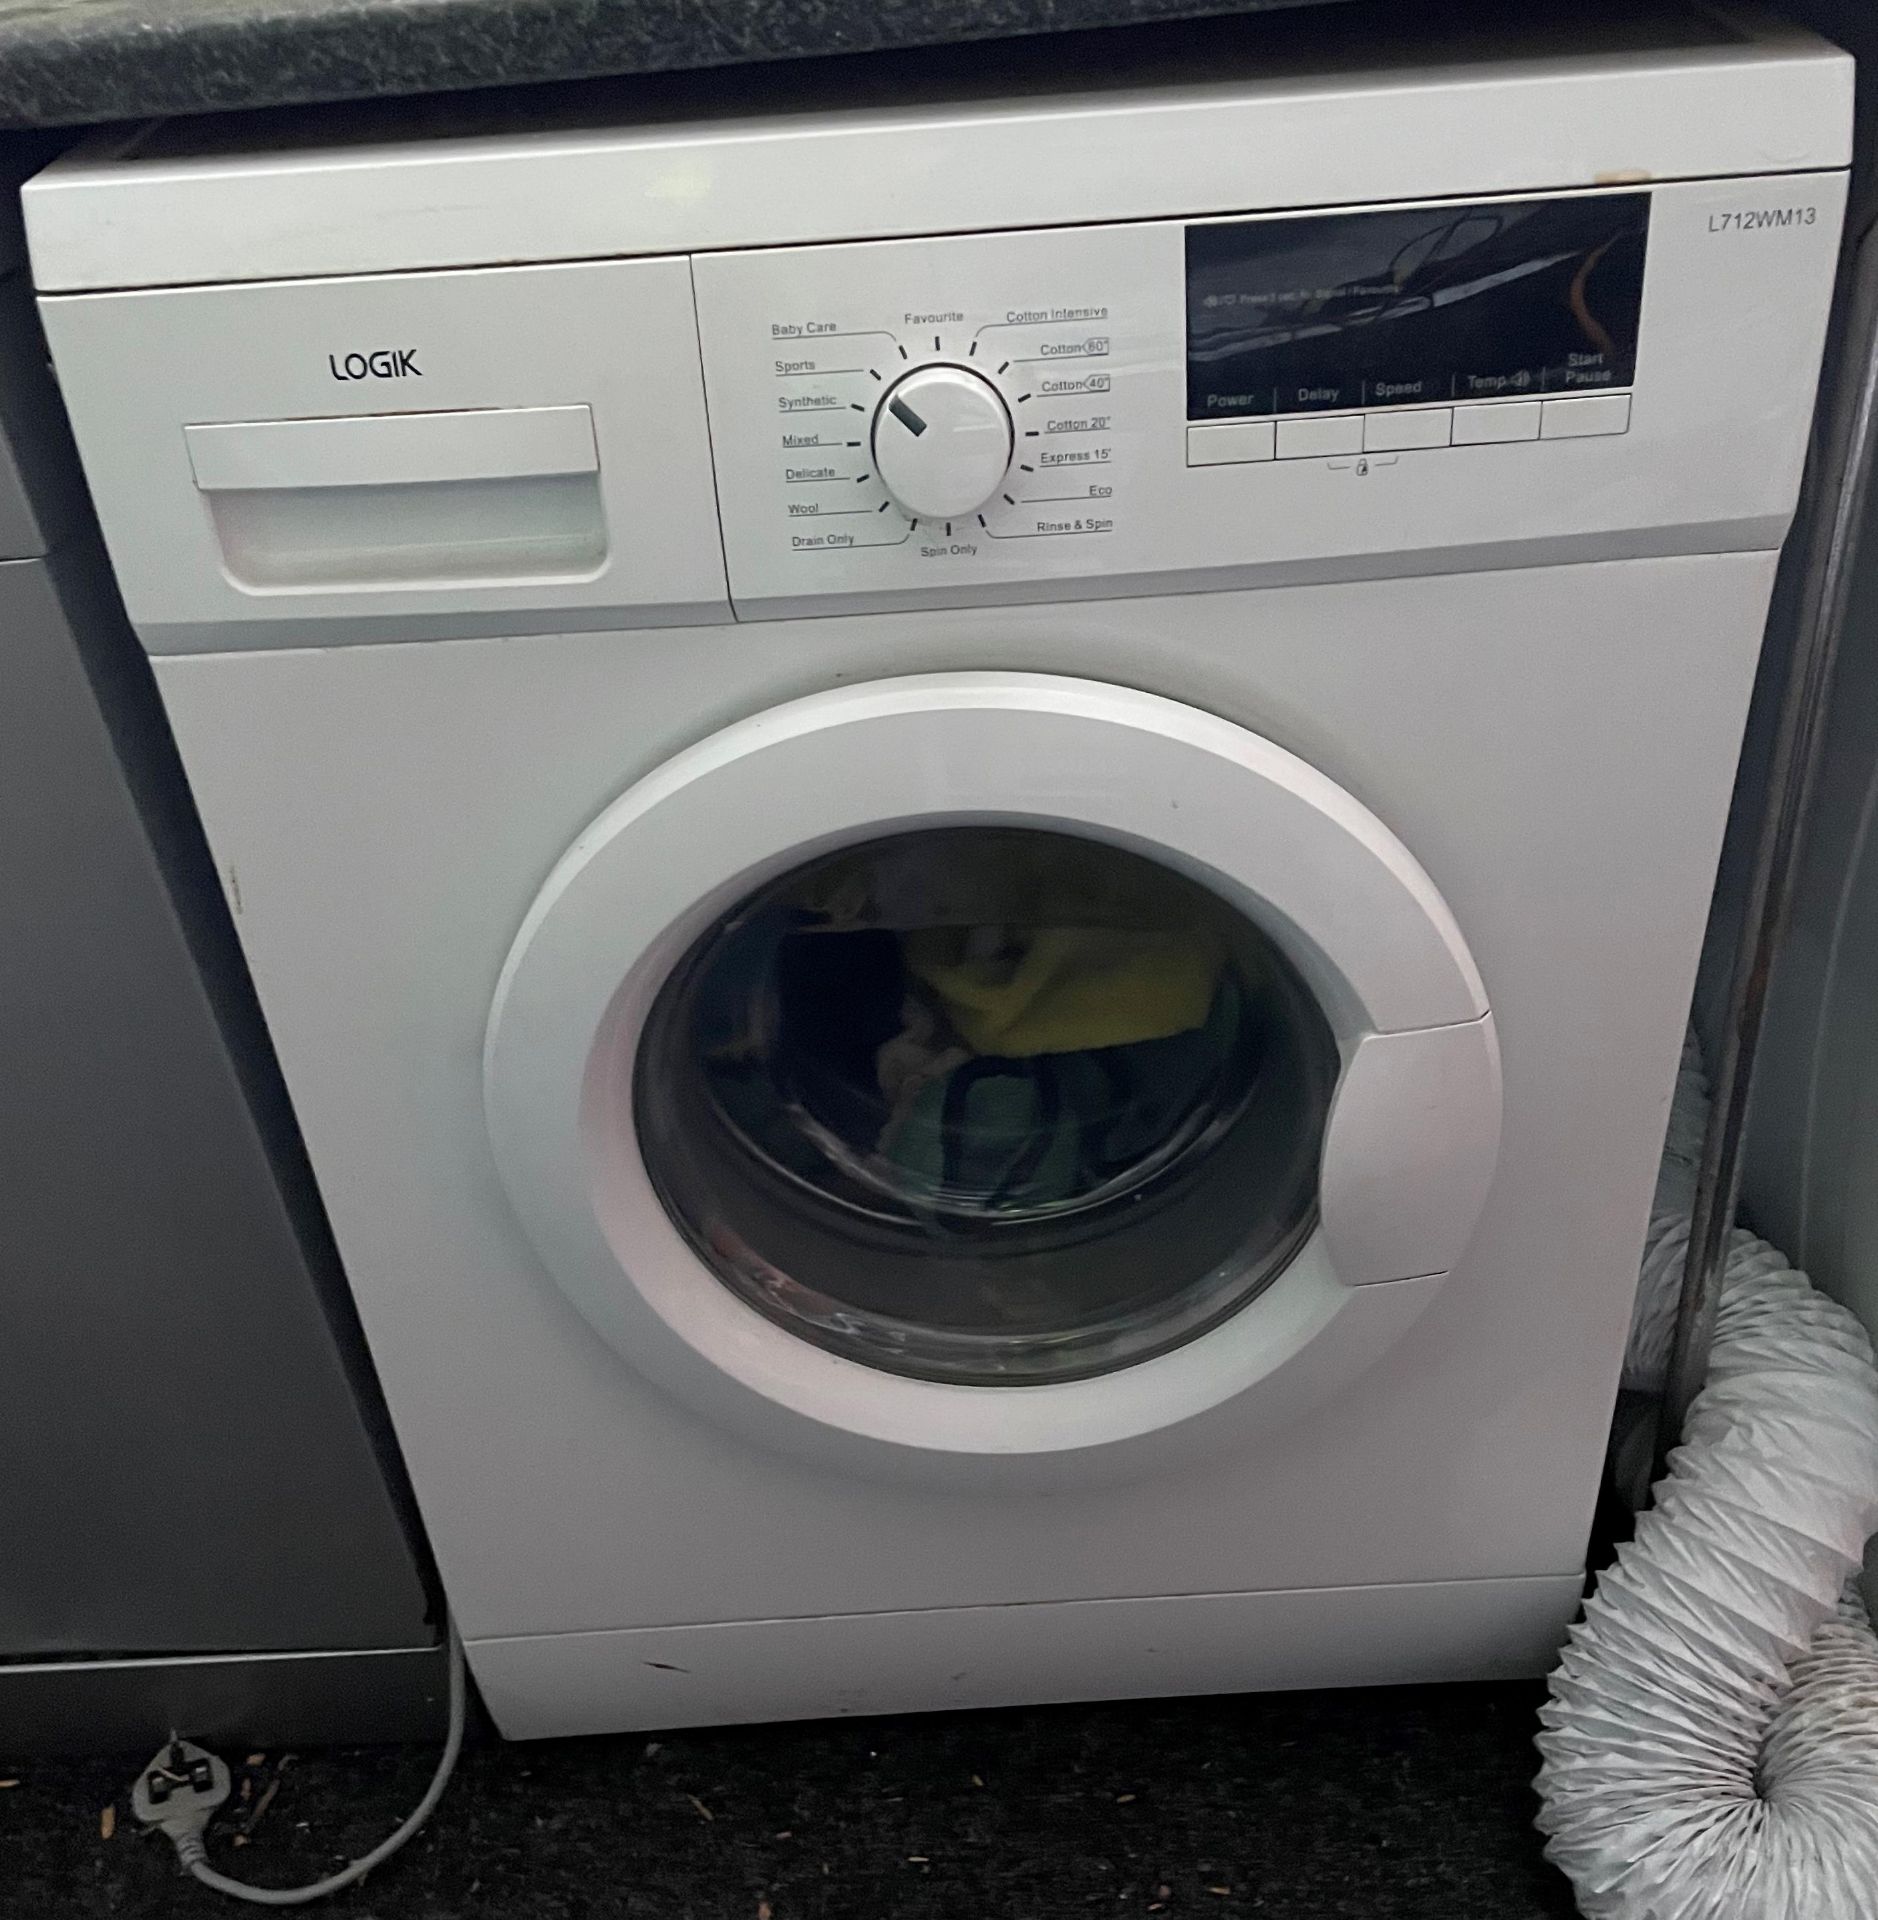 Logik L718WM13 washing machine in white (collection from TOWN END GARAGE, OSSETT,